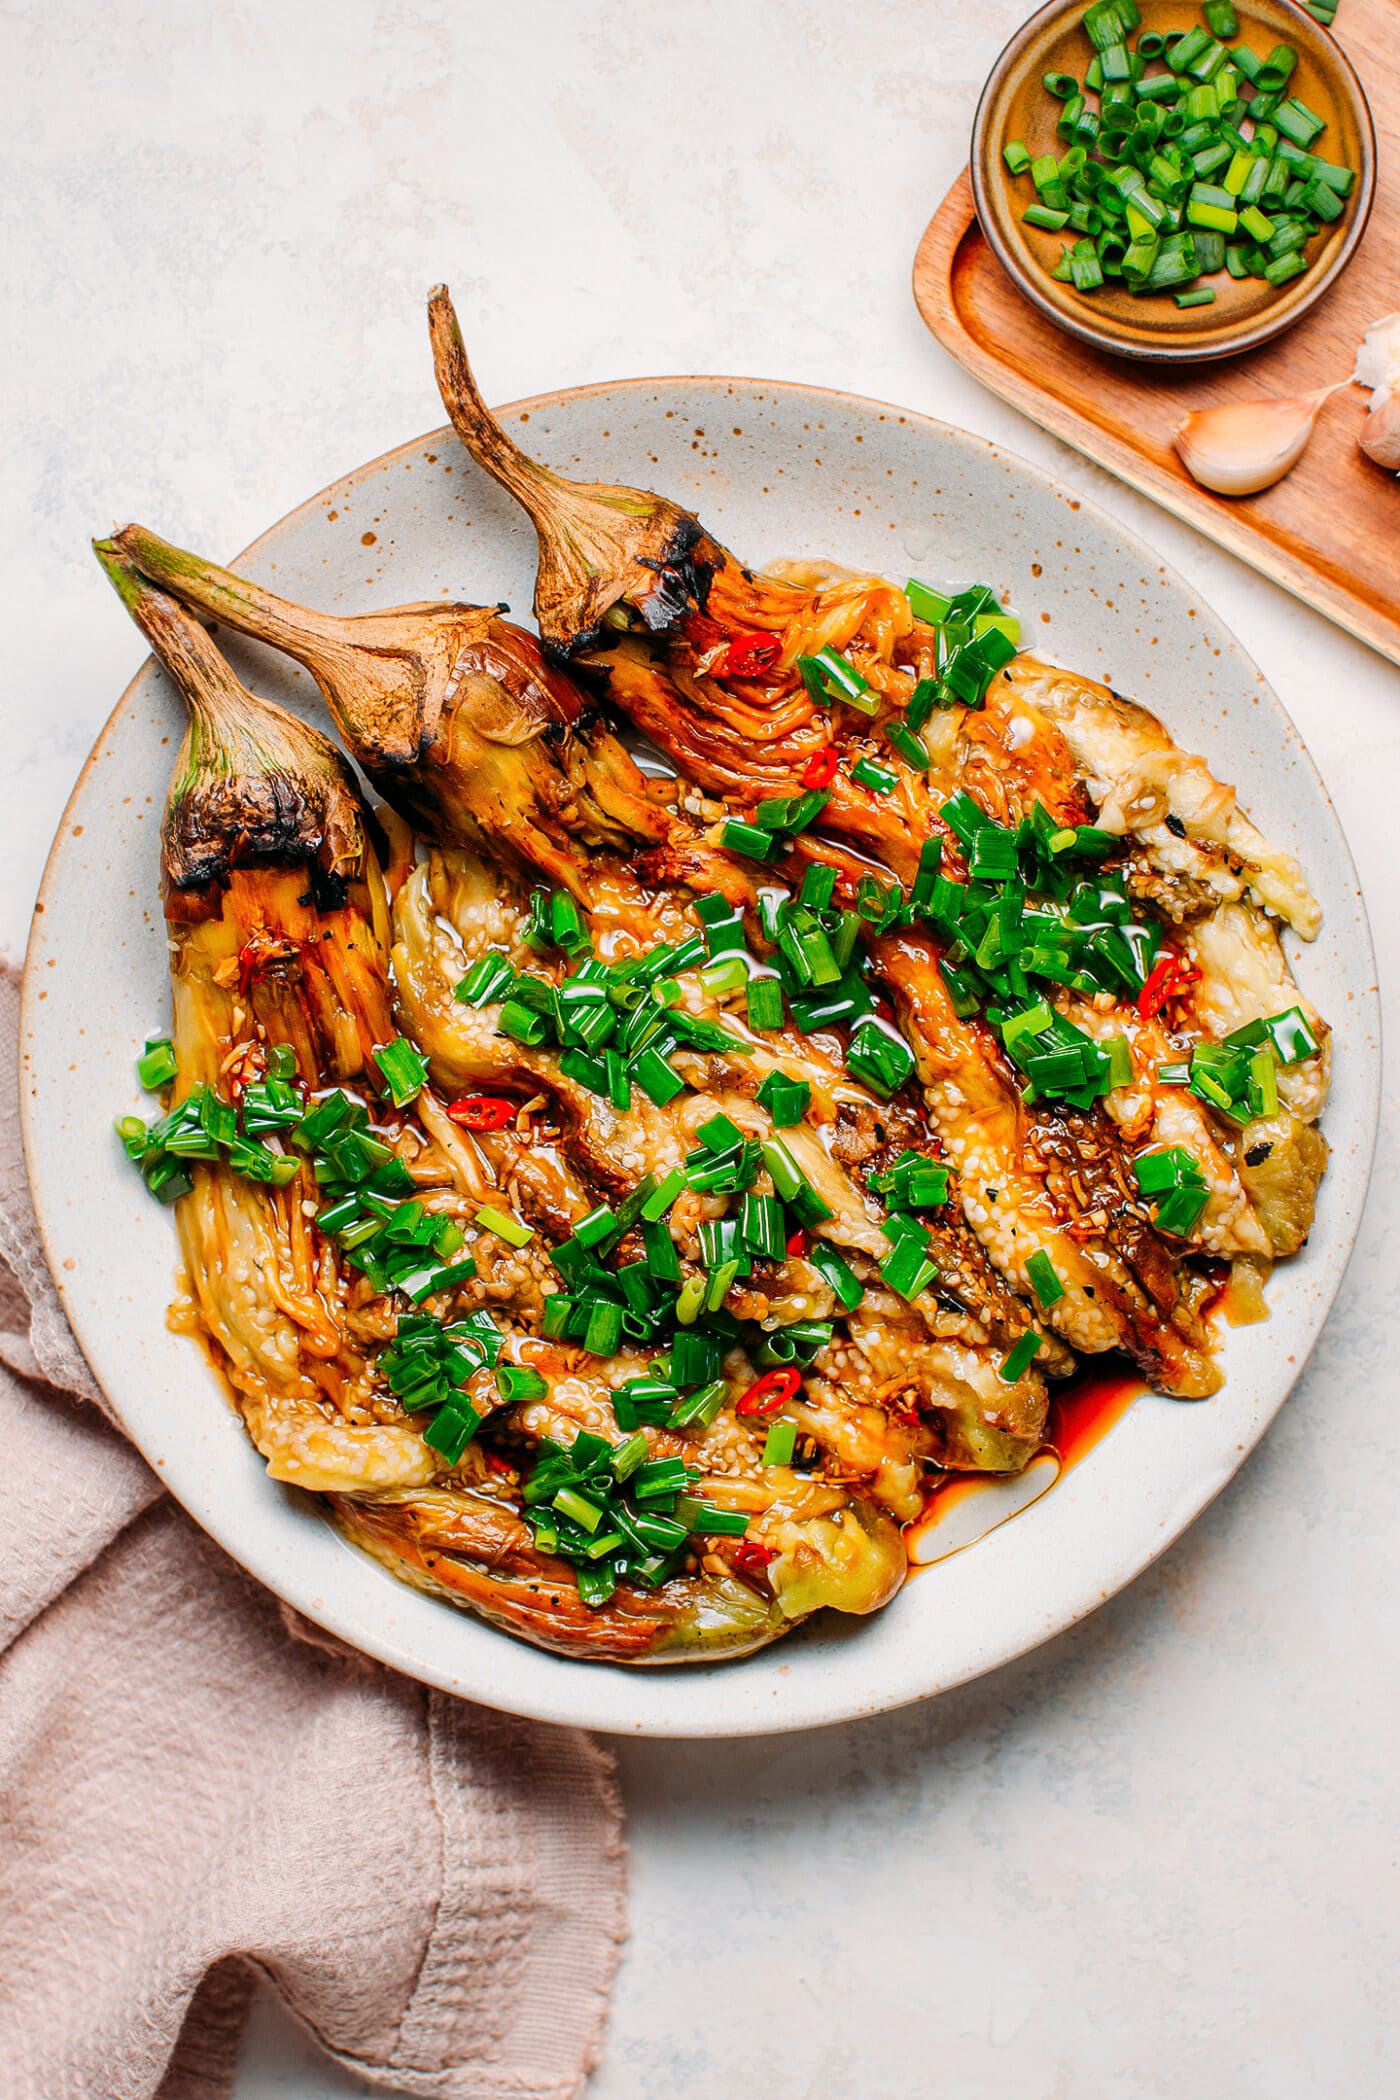 Grilled eggplants topped with green onions and chili.